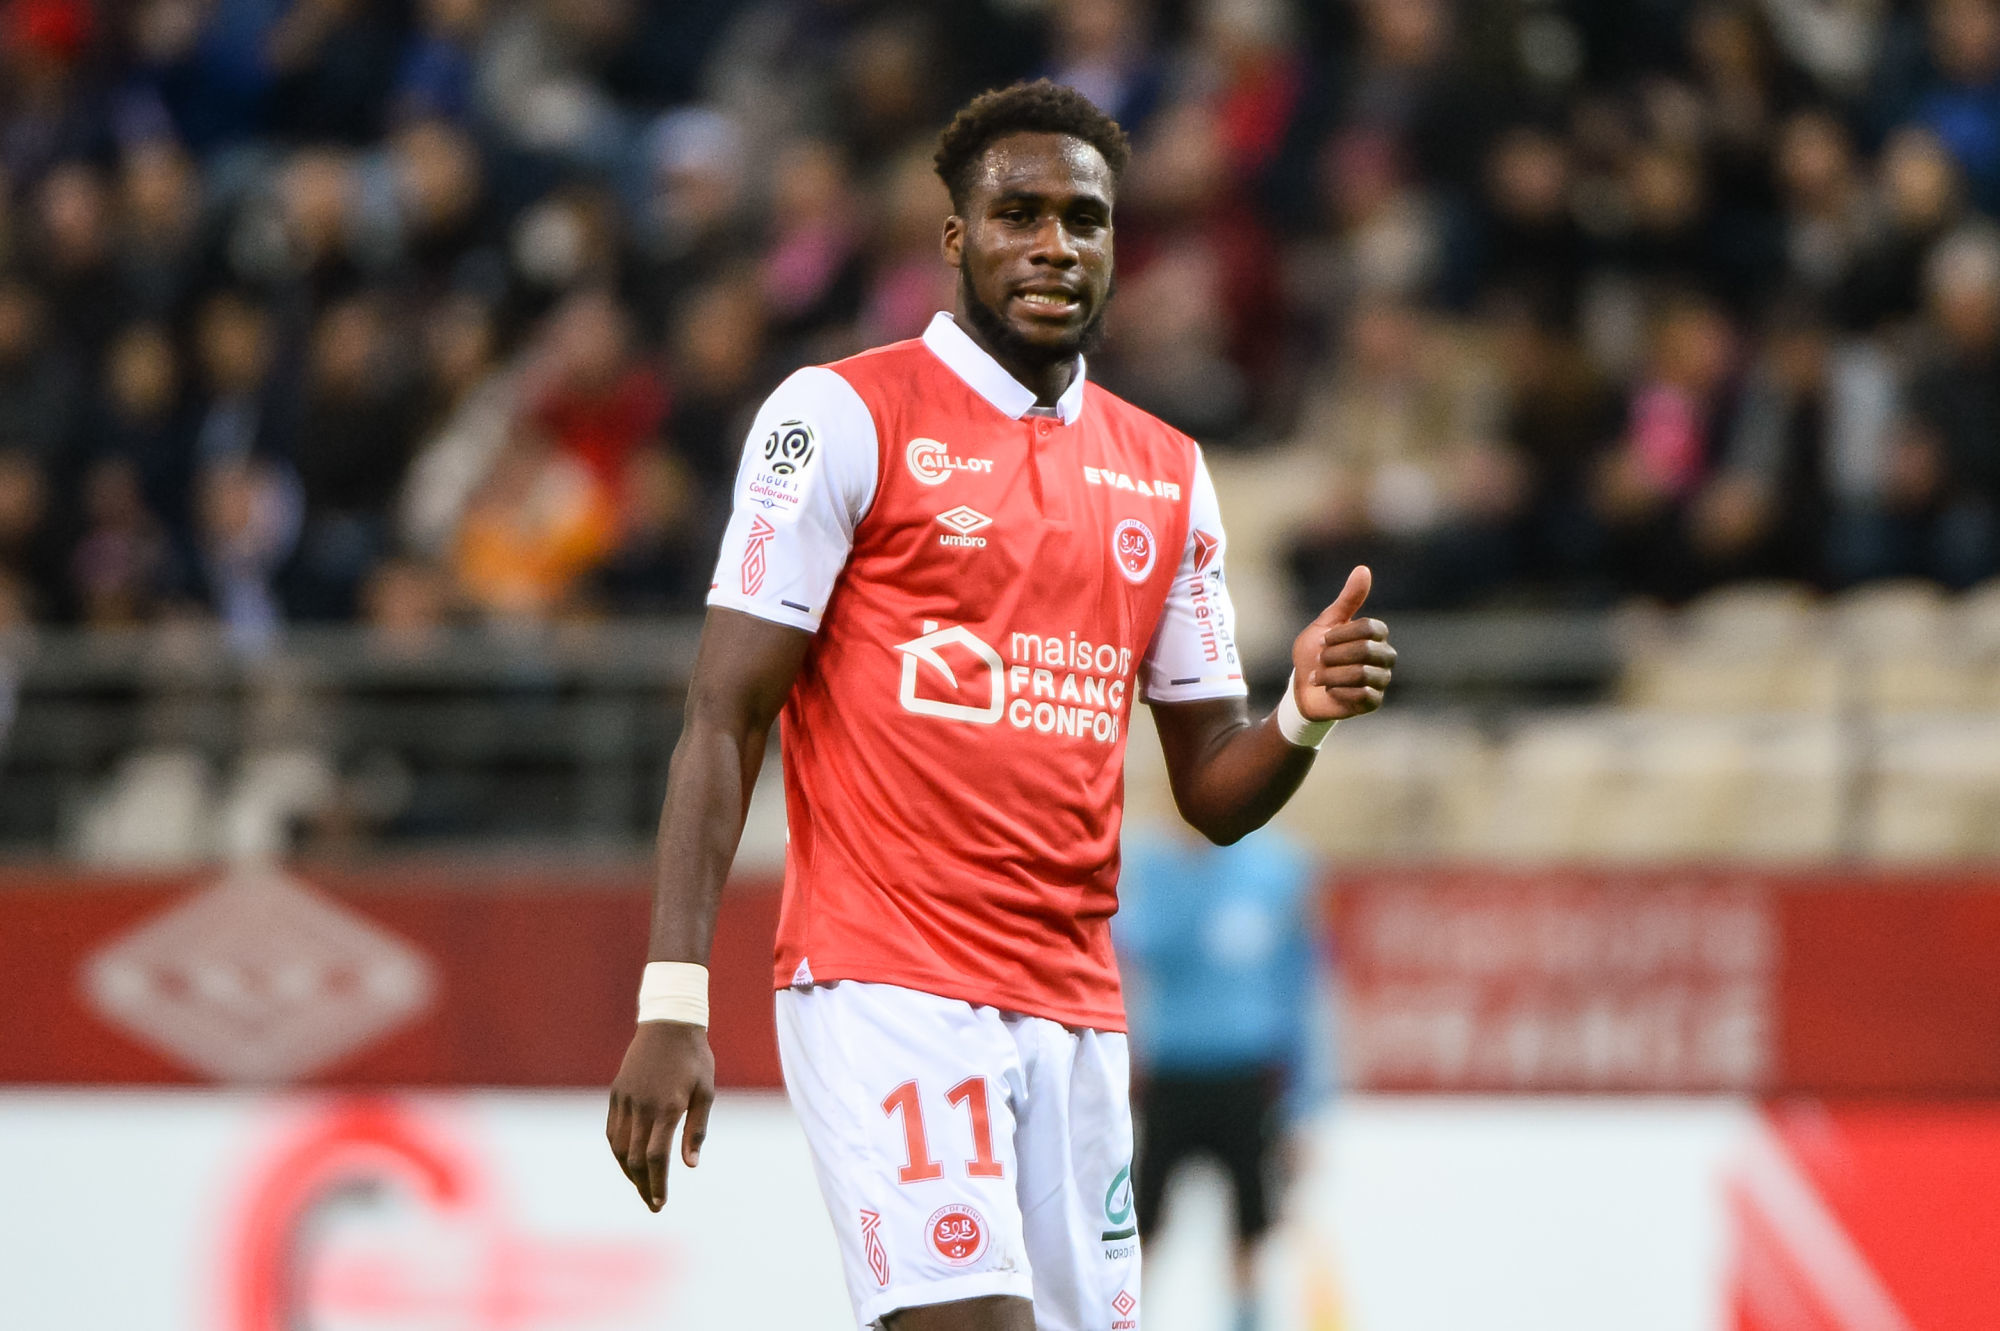 Boulaye DIA of Reims reacts during the French Ligue 1 football match between Stade de Reims and Montpellier HSC at Stade Auguste Delaune on October 19, 2019 in Reims, France. (Photo by Baptiste Fernandez/Icon Sport) - Boulaye DIA - Stade Auguste-Delaune - Reims (France)